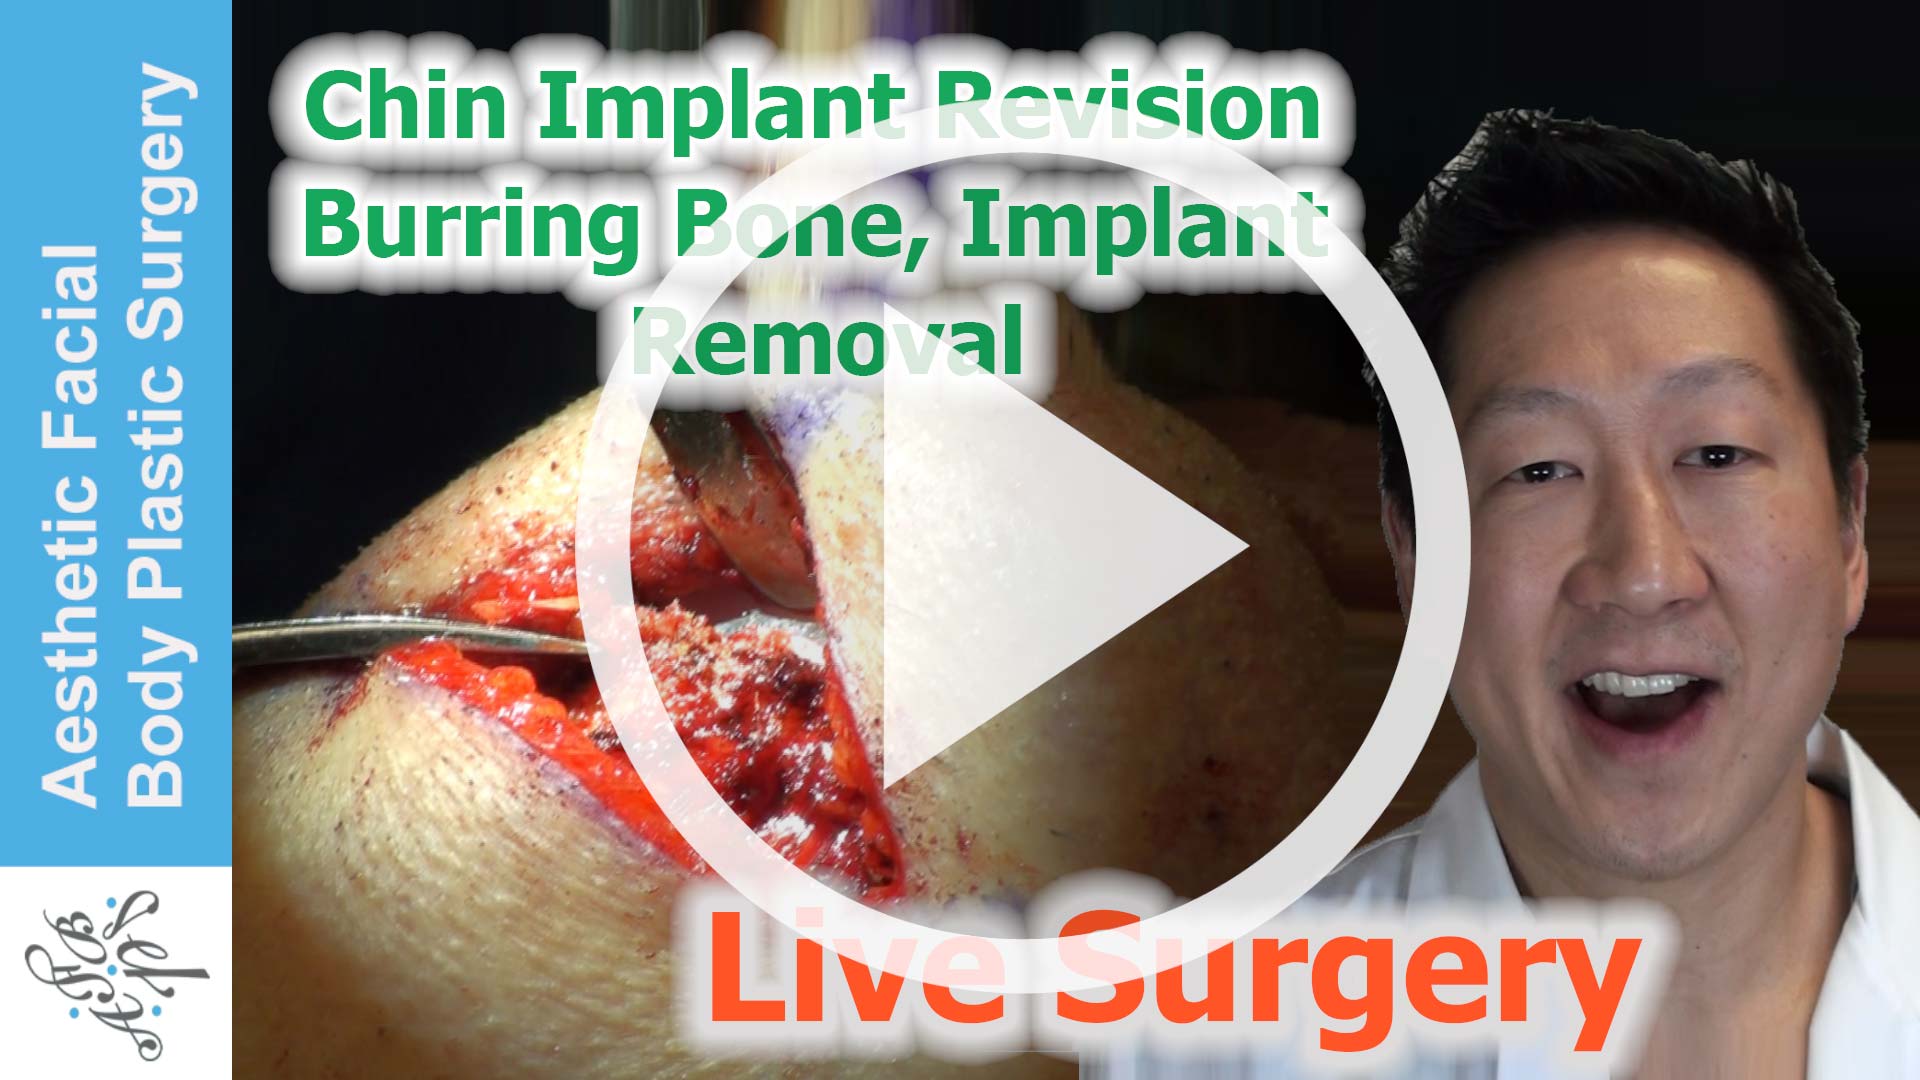 Chin Implant Revision Live Surgery, Bone Burring, Removal, & Replacement - Dr Young Bellevue Seattle